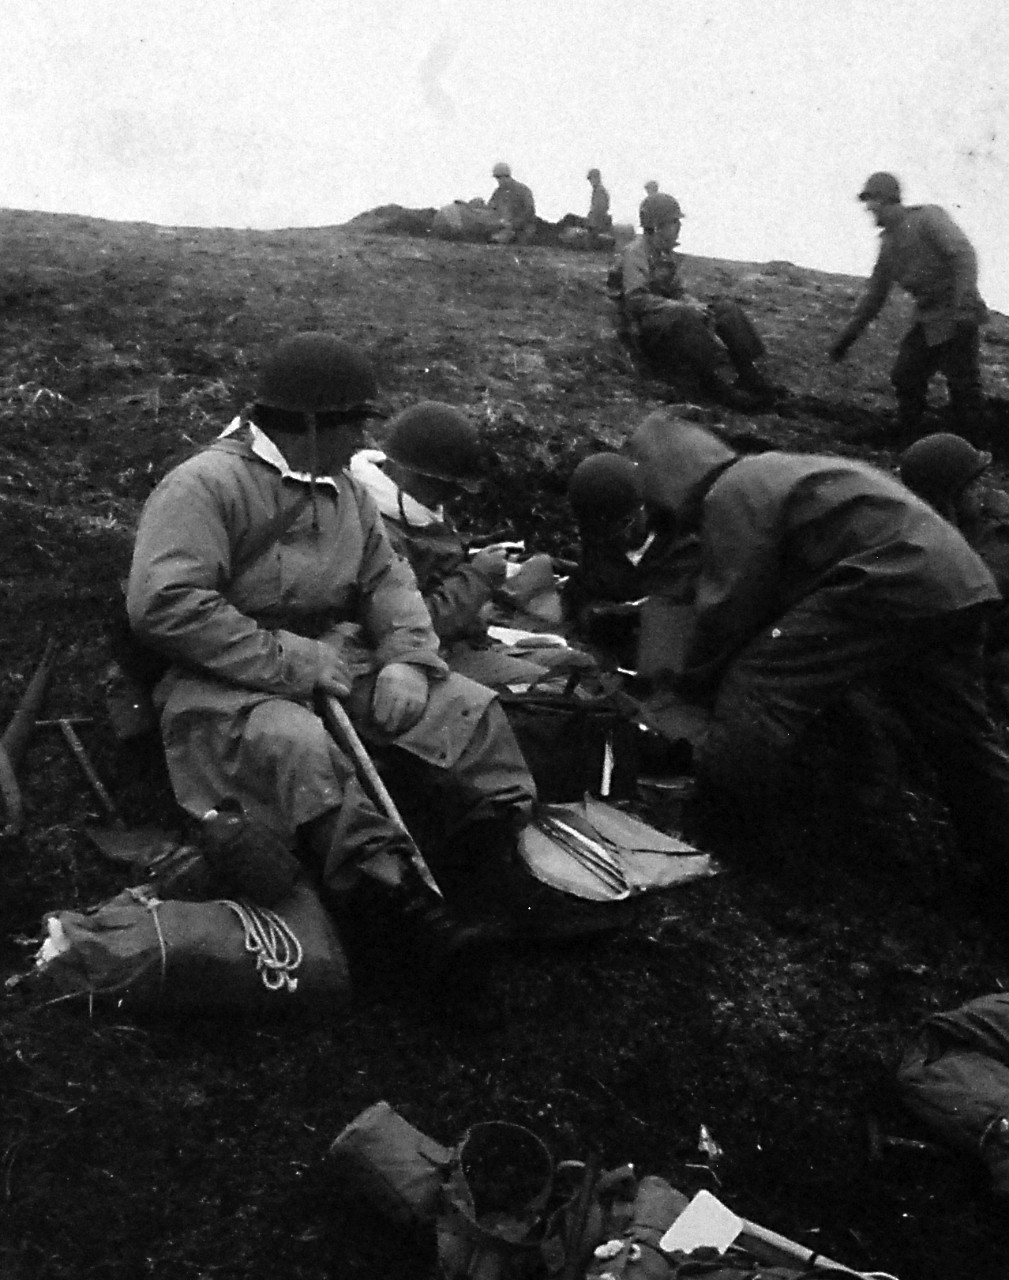 80-G-50933:    Aleutian Islands Campaign, June 1942 - August 1943.  Battle for Attu, May 1943.    U.S. Occupation of Attu, Aleutian Islands.  Intelligence men (G-2) looking over captured Japanese articles, May 13, 1943.  U.S. Navy Photograph, now in the collections of the National Archives.  (2016/05/10).